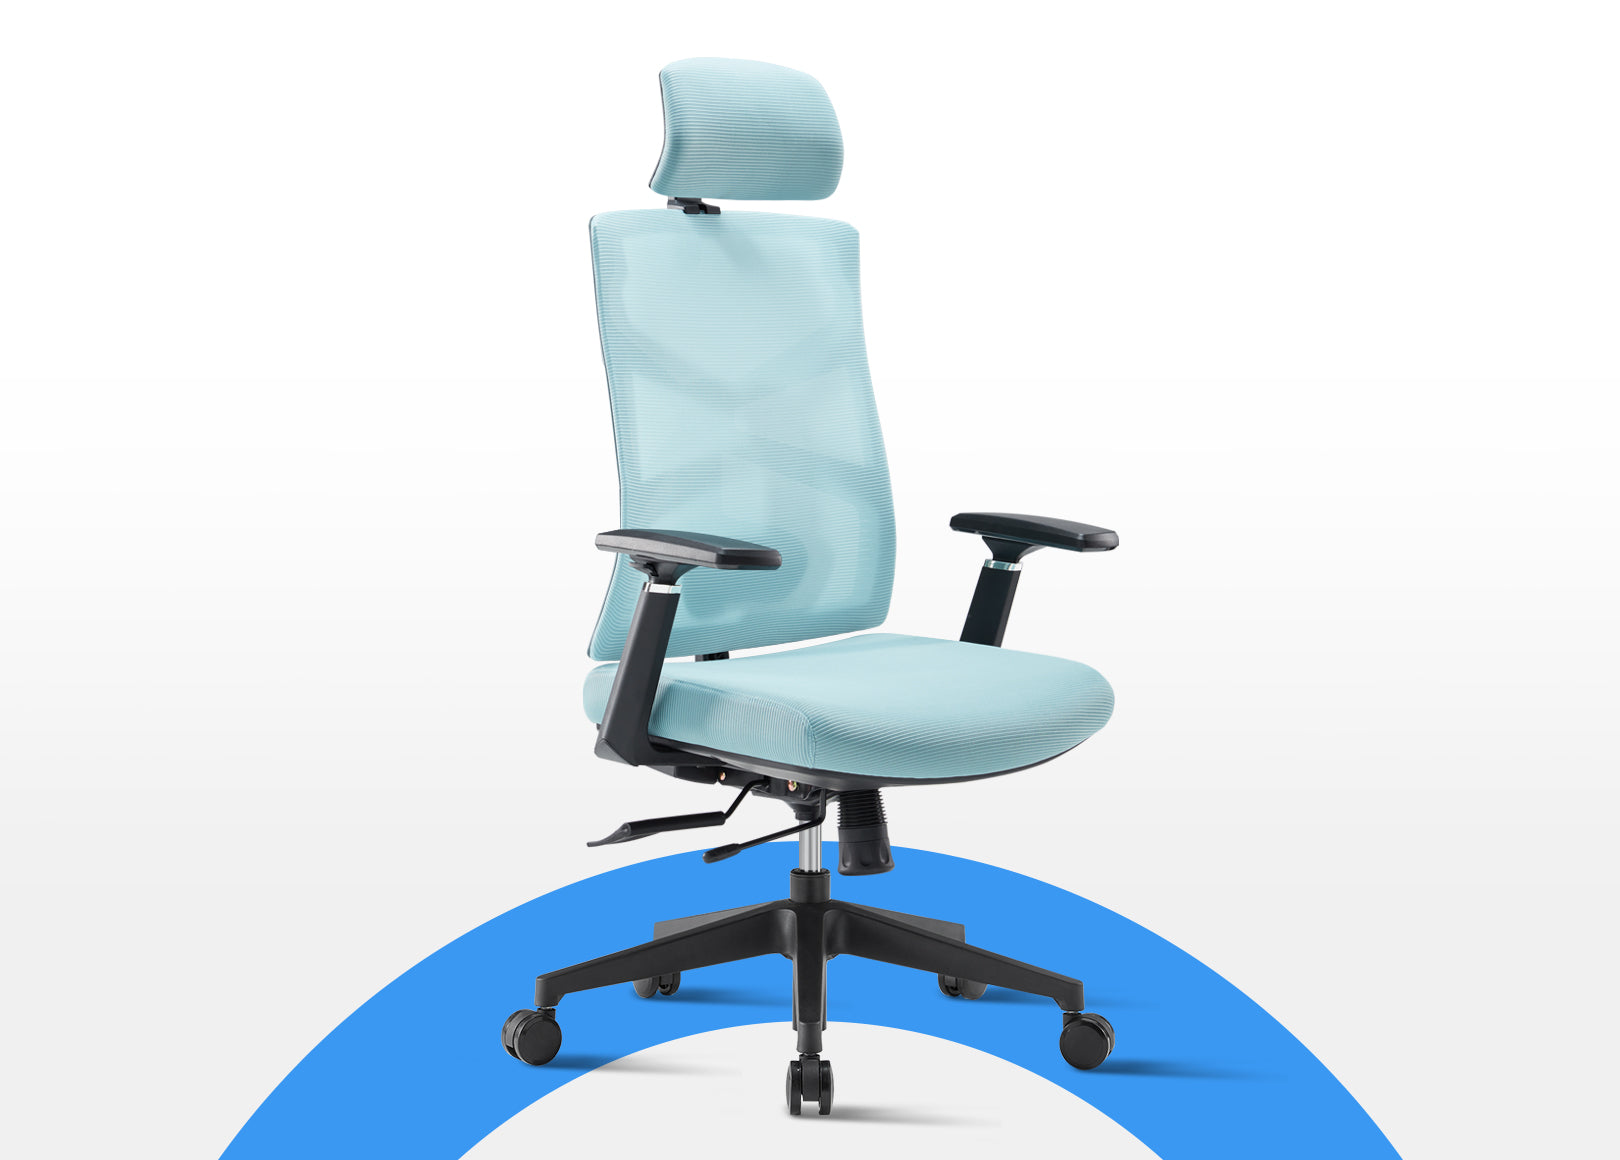 Sunaofe Voyager Pro Ergonomic Chair Cyan Functional adjustability, provides customized comfort for you.